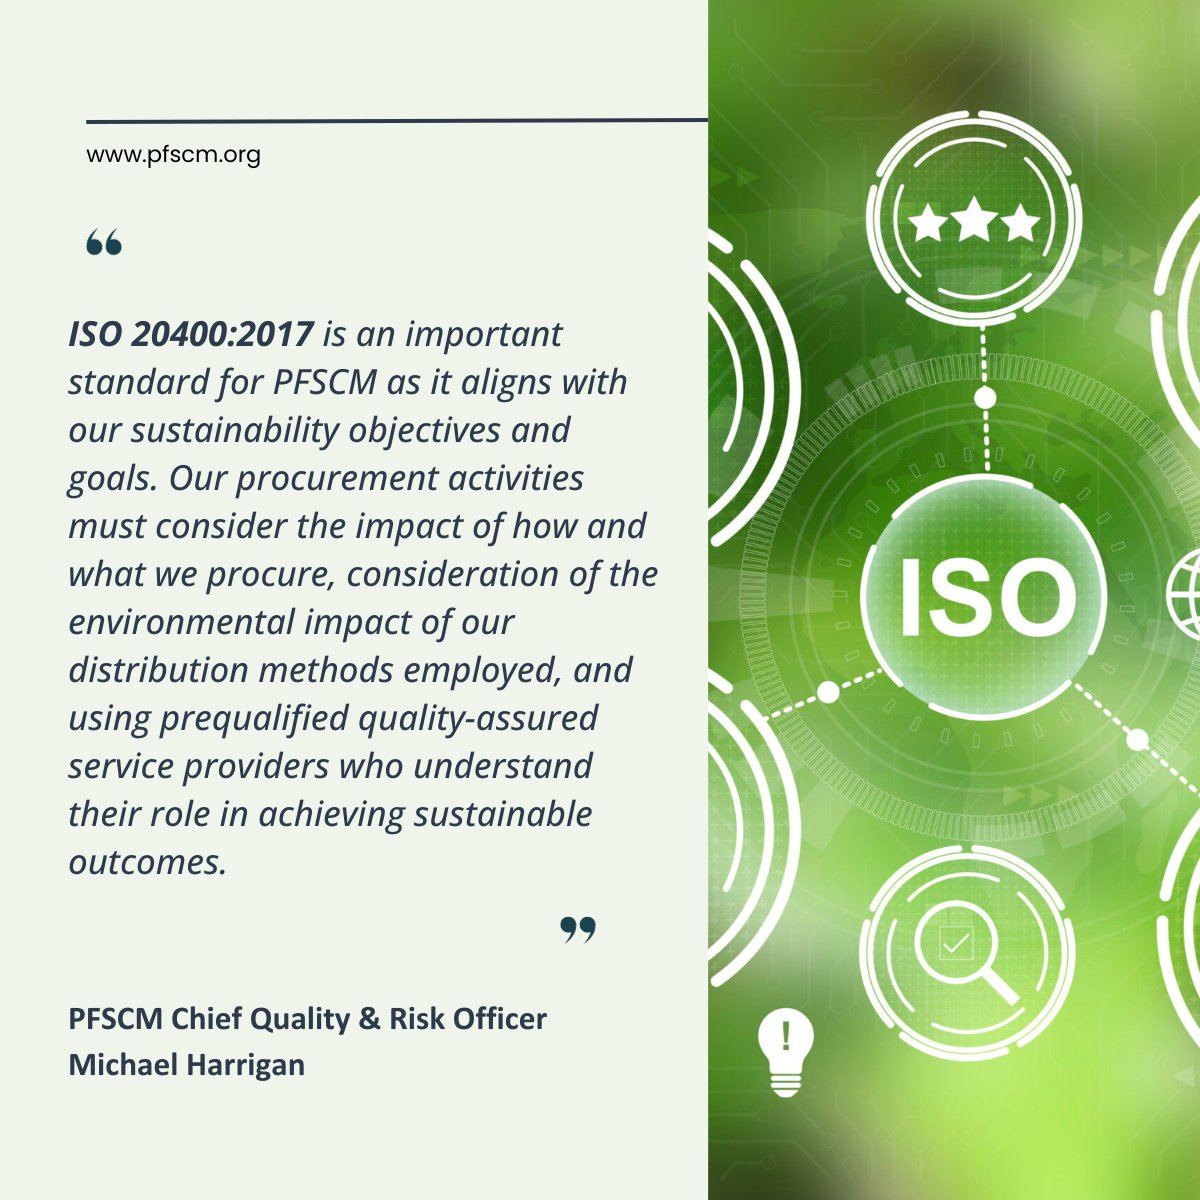 PFSCM is pleased to share that following an assessment by leading certification body DQS, our #procurement processes were found to align with ISO 20400:2017 for Sustainable Procurement. This verification assessed the integration of ISO 20400:2017 into our already-certified ISO…